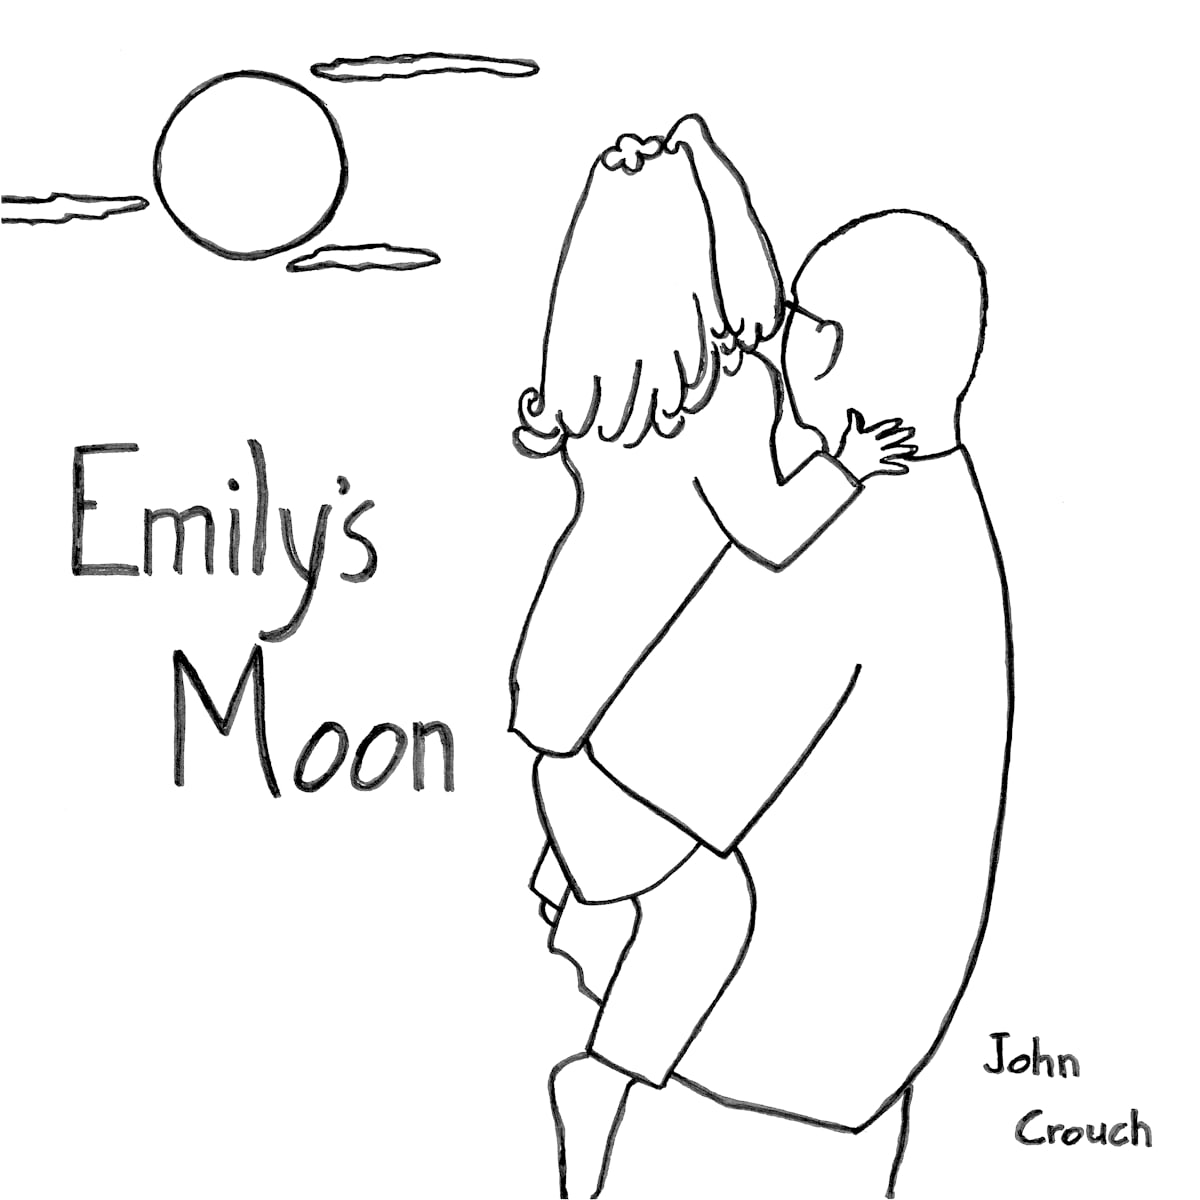 Emily’s Moon (music cover art) by Shelley Crouch  Image: Cover art for original song by John Crouch